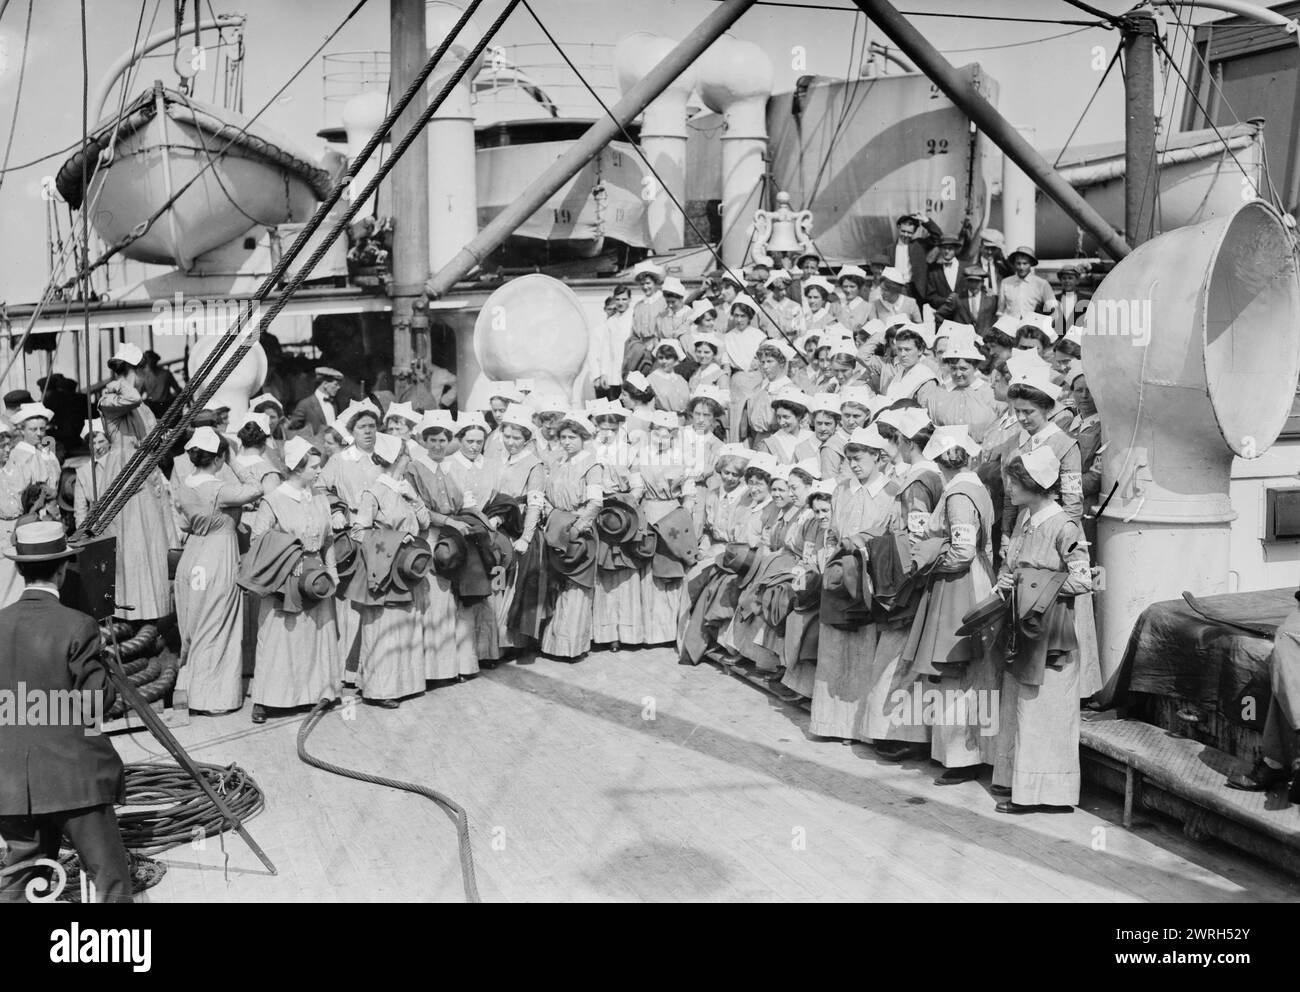 On &quot;Red Cross&quot;, 1914 Sept. Medical personnel aboard the &quot;Red Cross&quot; bound for Europe at the beginning of World War I in mid-September 1914. Stock Photo